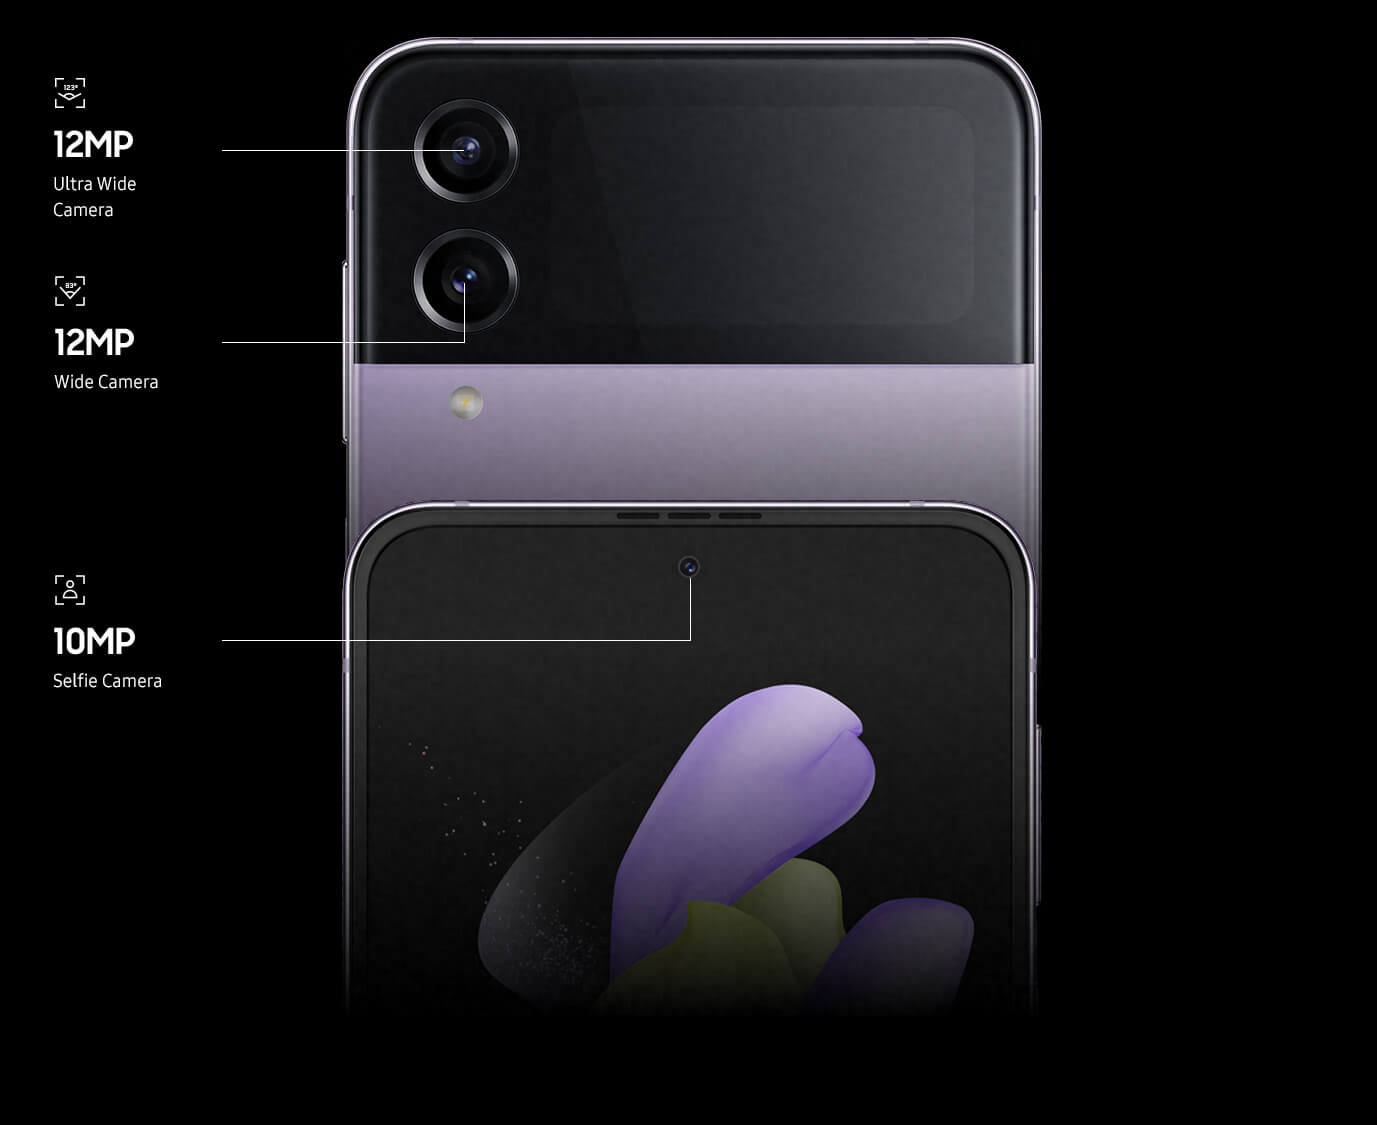 Image of the front and the rear cameras on the Z Flip4. On the front is a pair of 12MP cameras, one is ultrawide and one is a wide camera. On the front is a 10MP Selfie camera.